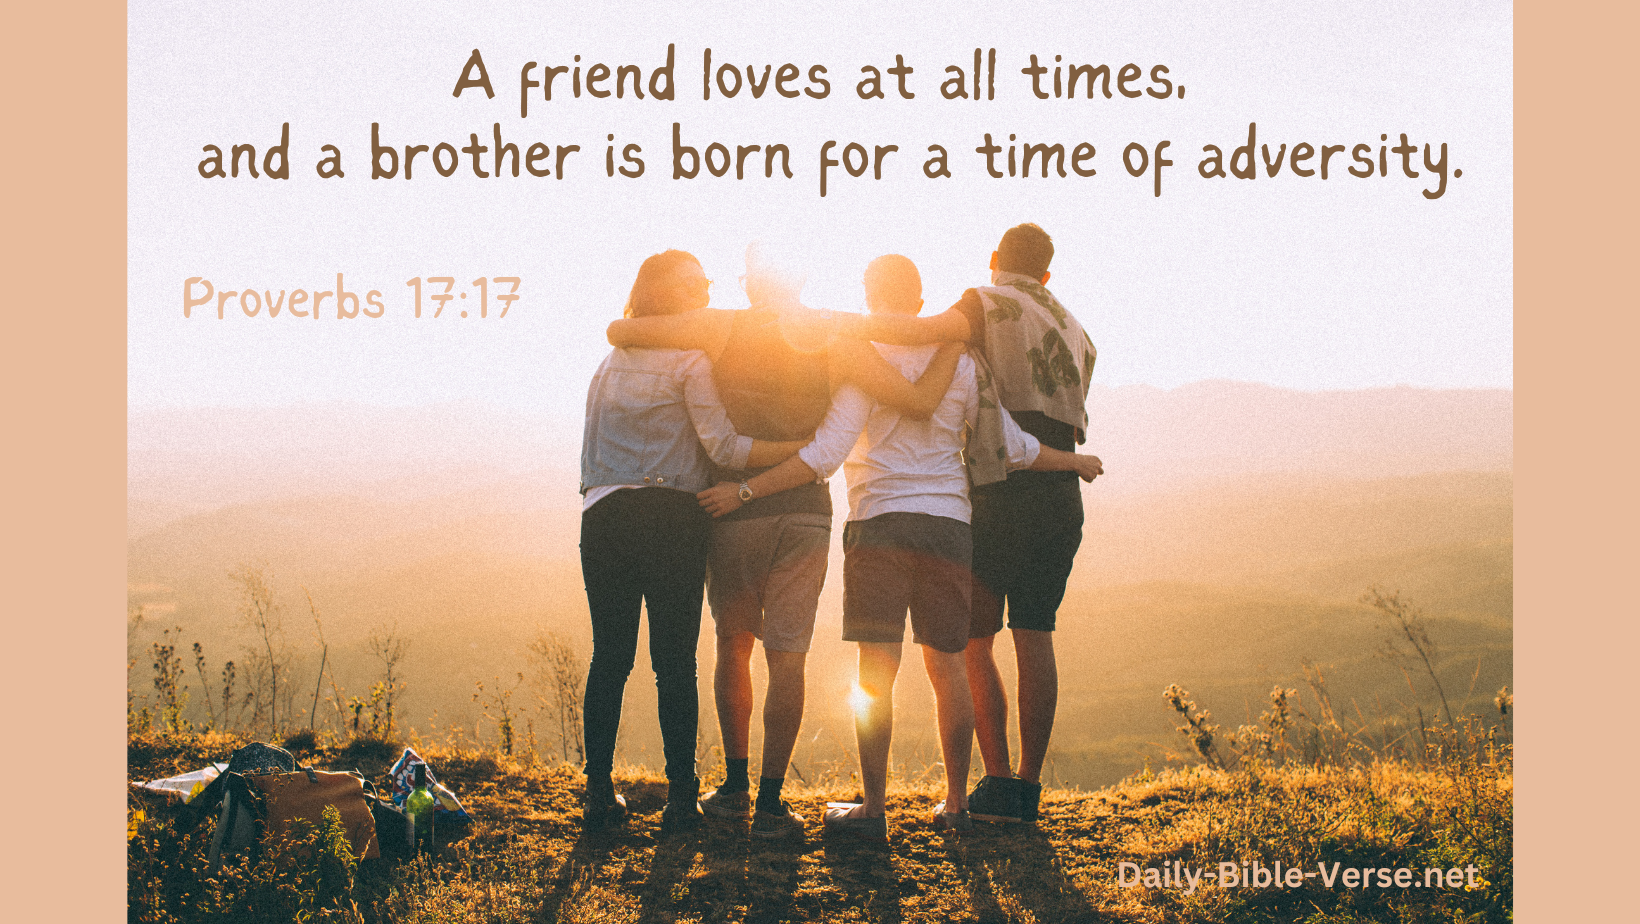 A friend loves at all times, and a brother is born for a time of adversity.